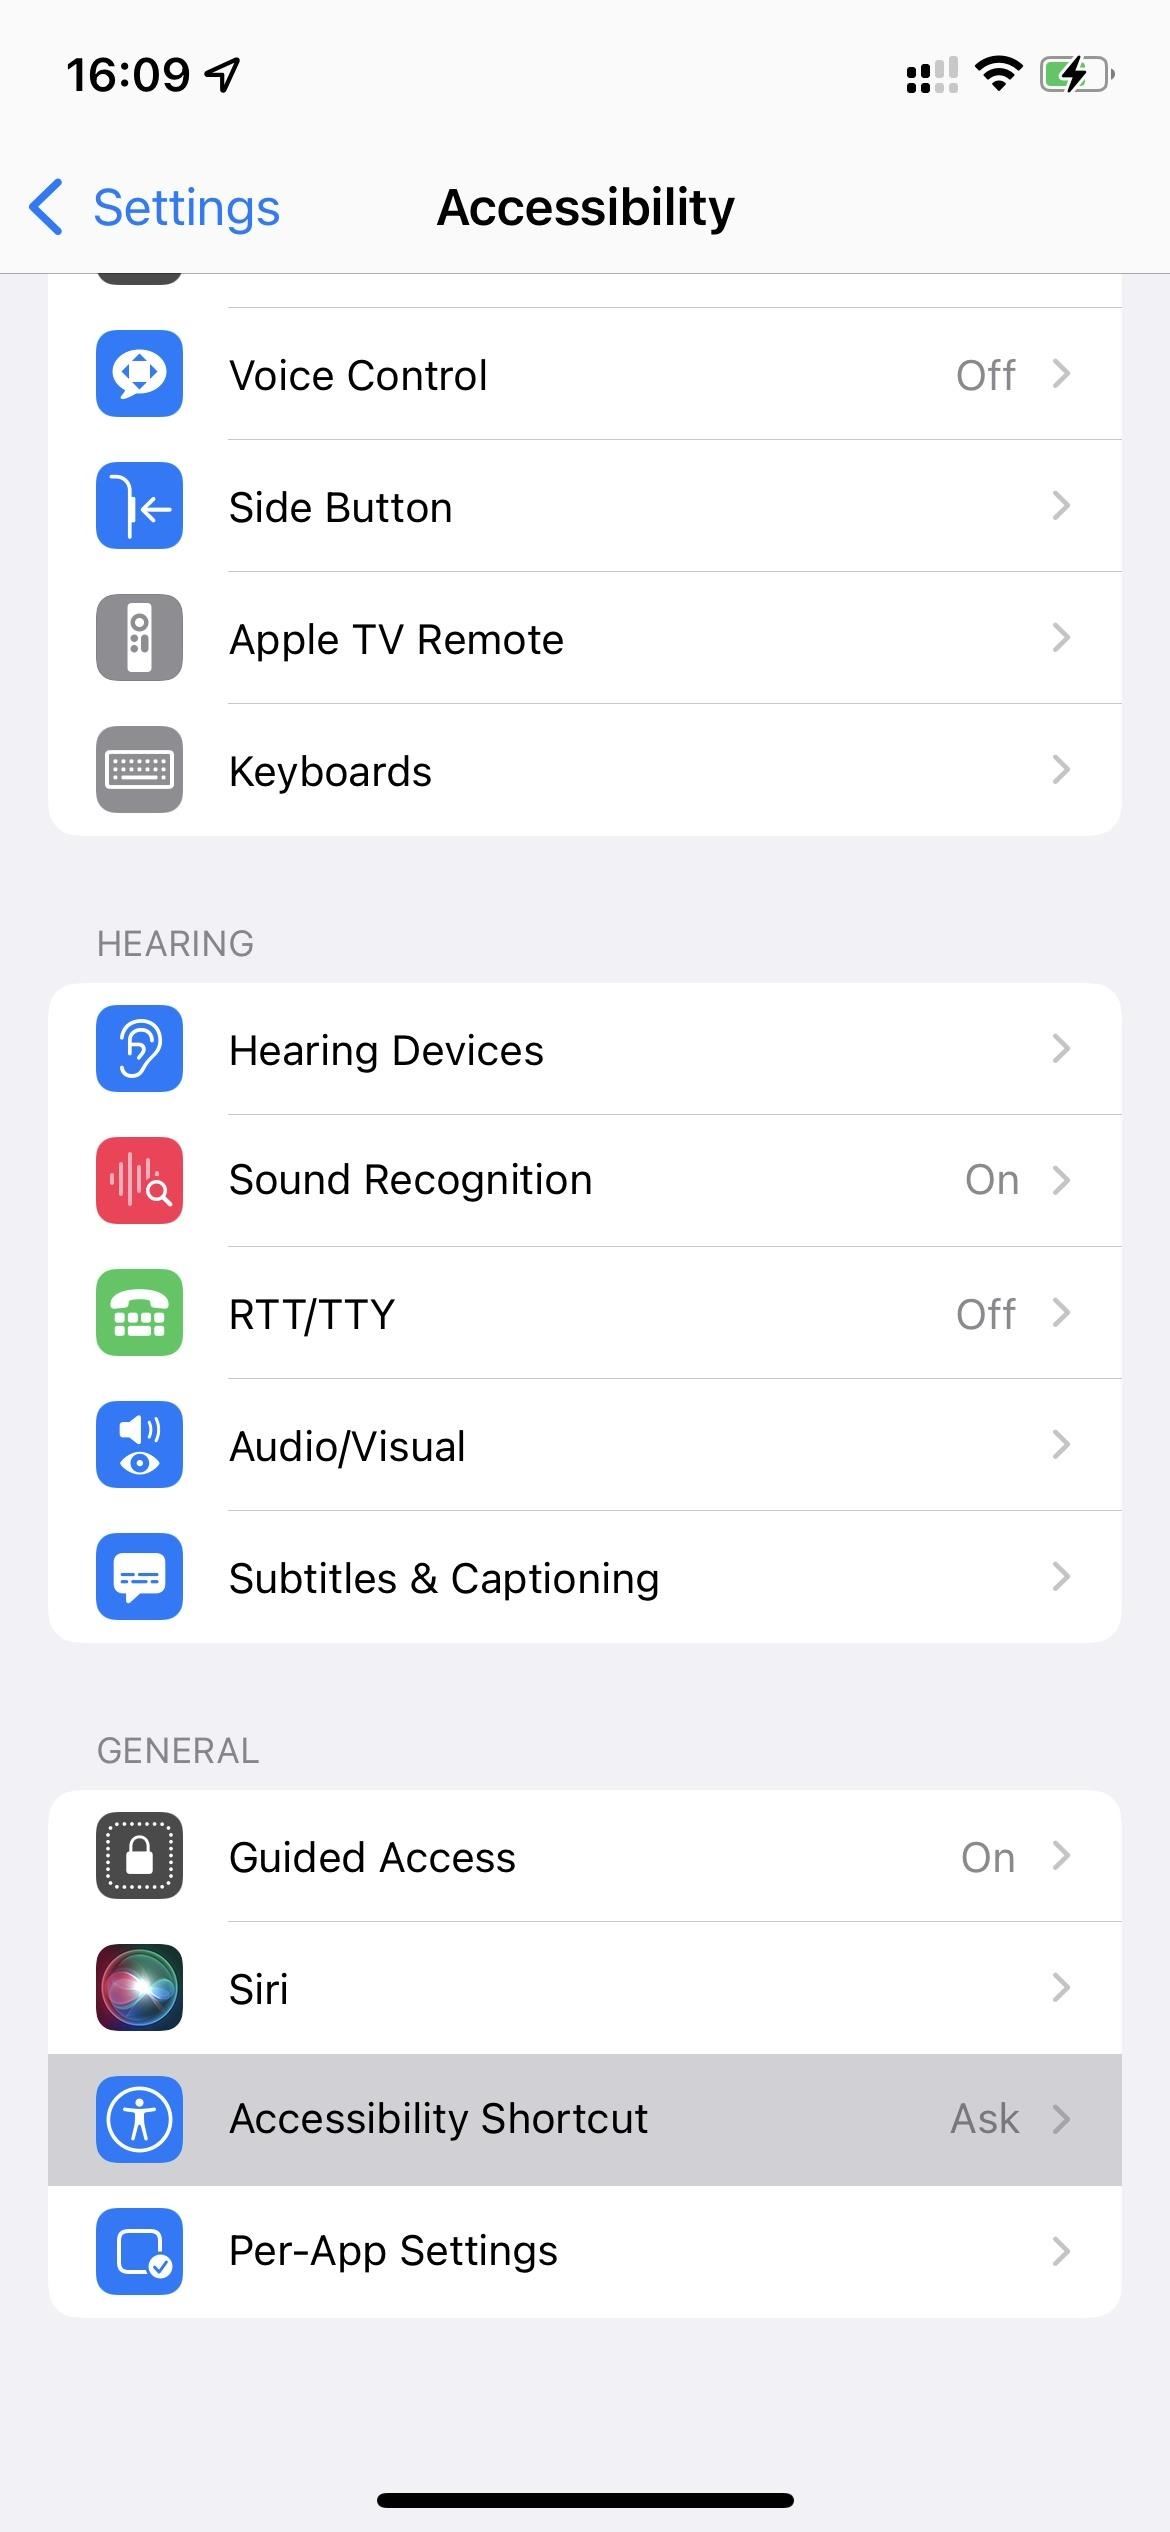 Turn Your iPhone into a Personal Sound Machine in iOS 15 to Help You Focus, Rest, and Stay Calm